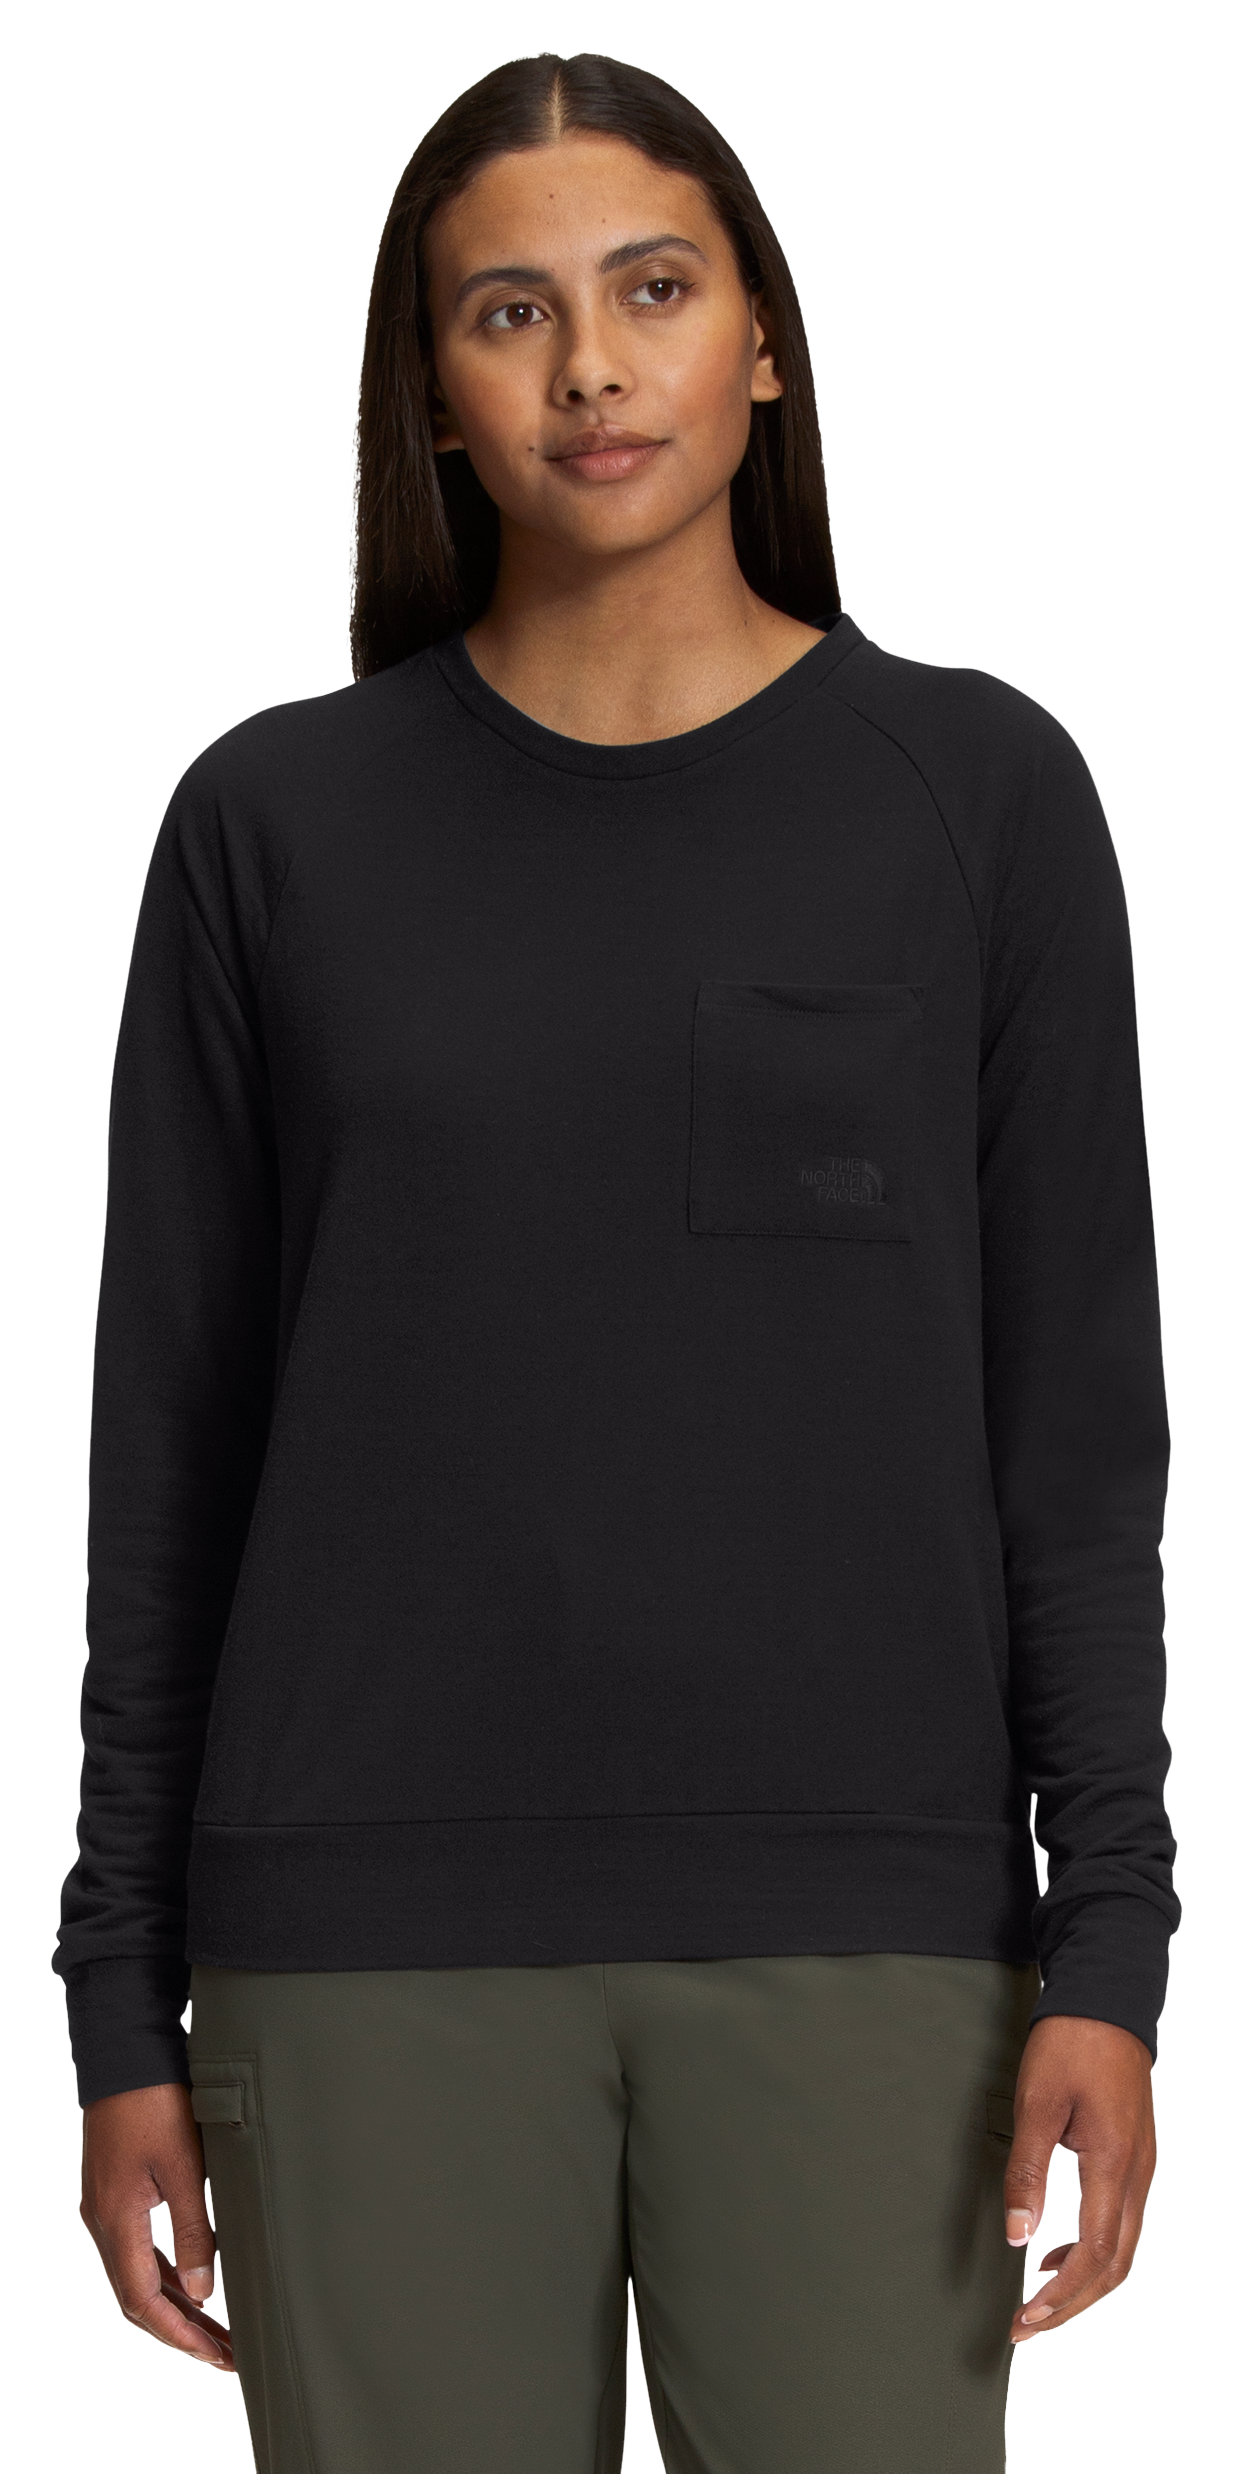 The North Face Westbrae Knit Long-Sleeve Crew for Ladies - TNF Black - M